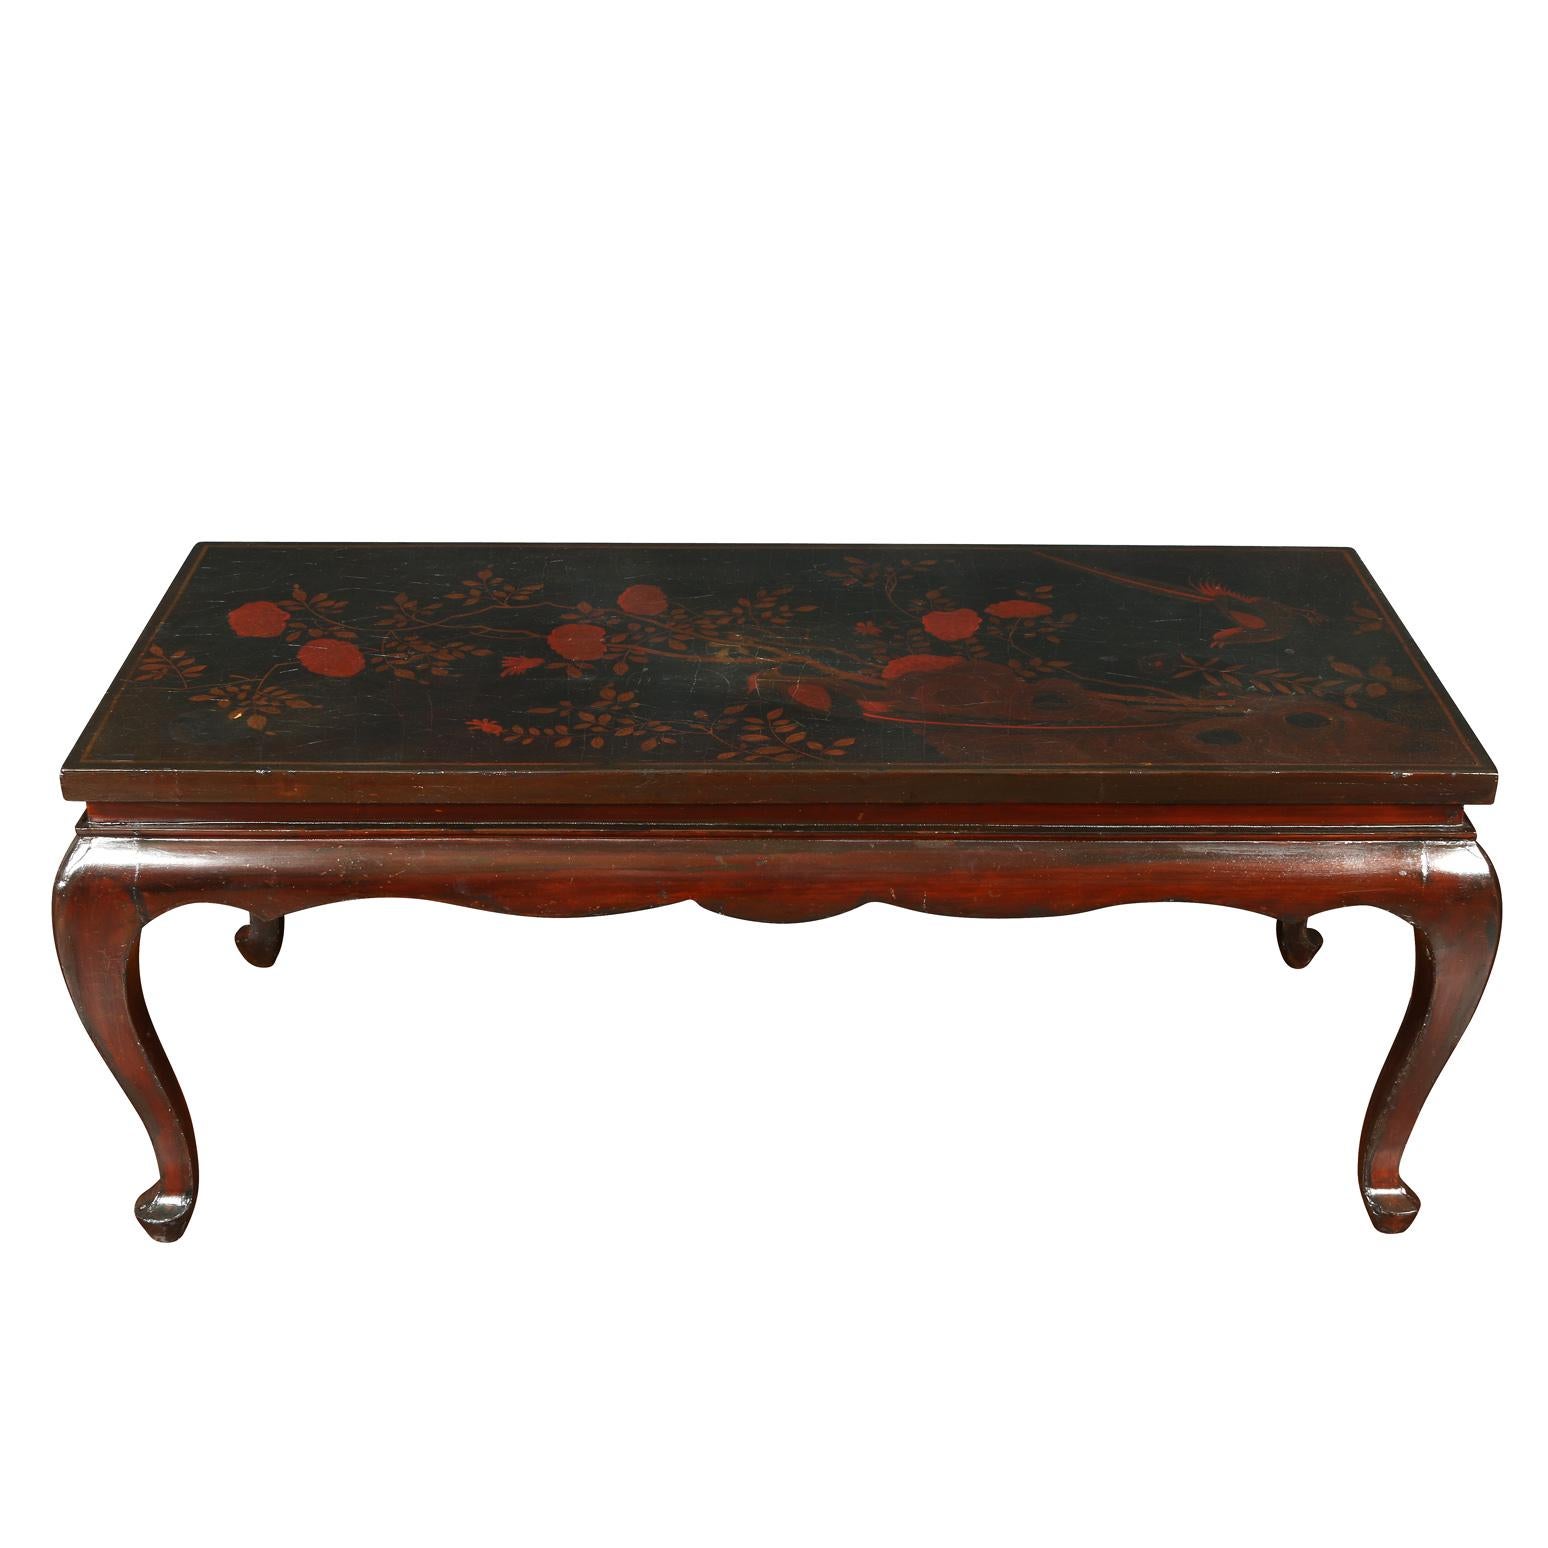 Unknown Antique Chinoiserie Lacquered Low Coffee Table with Red Flower Detail